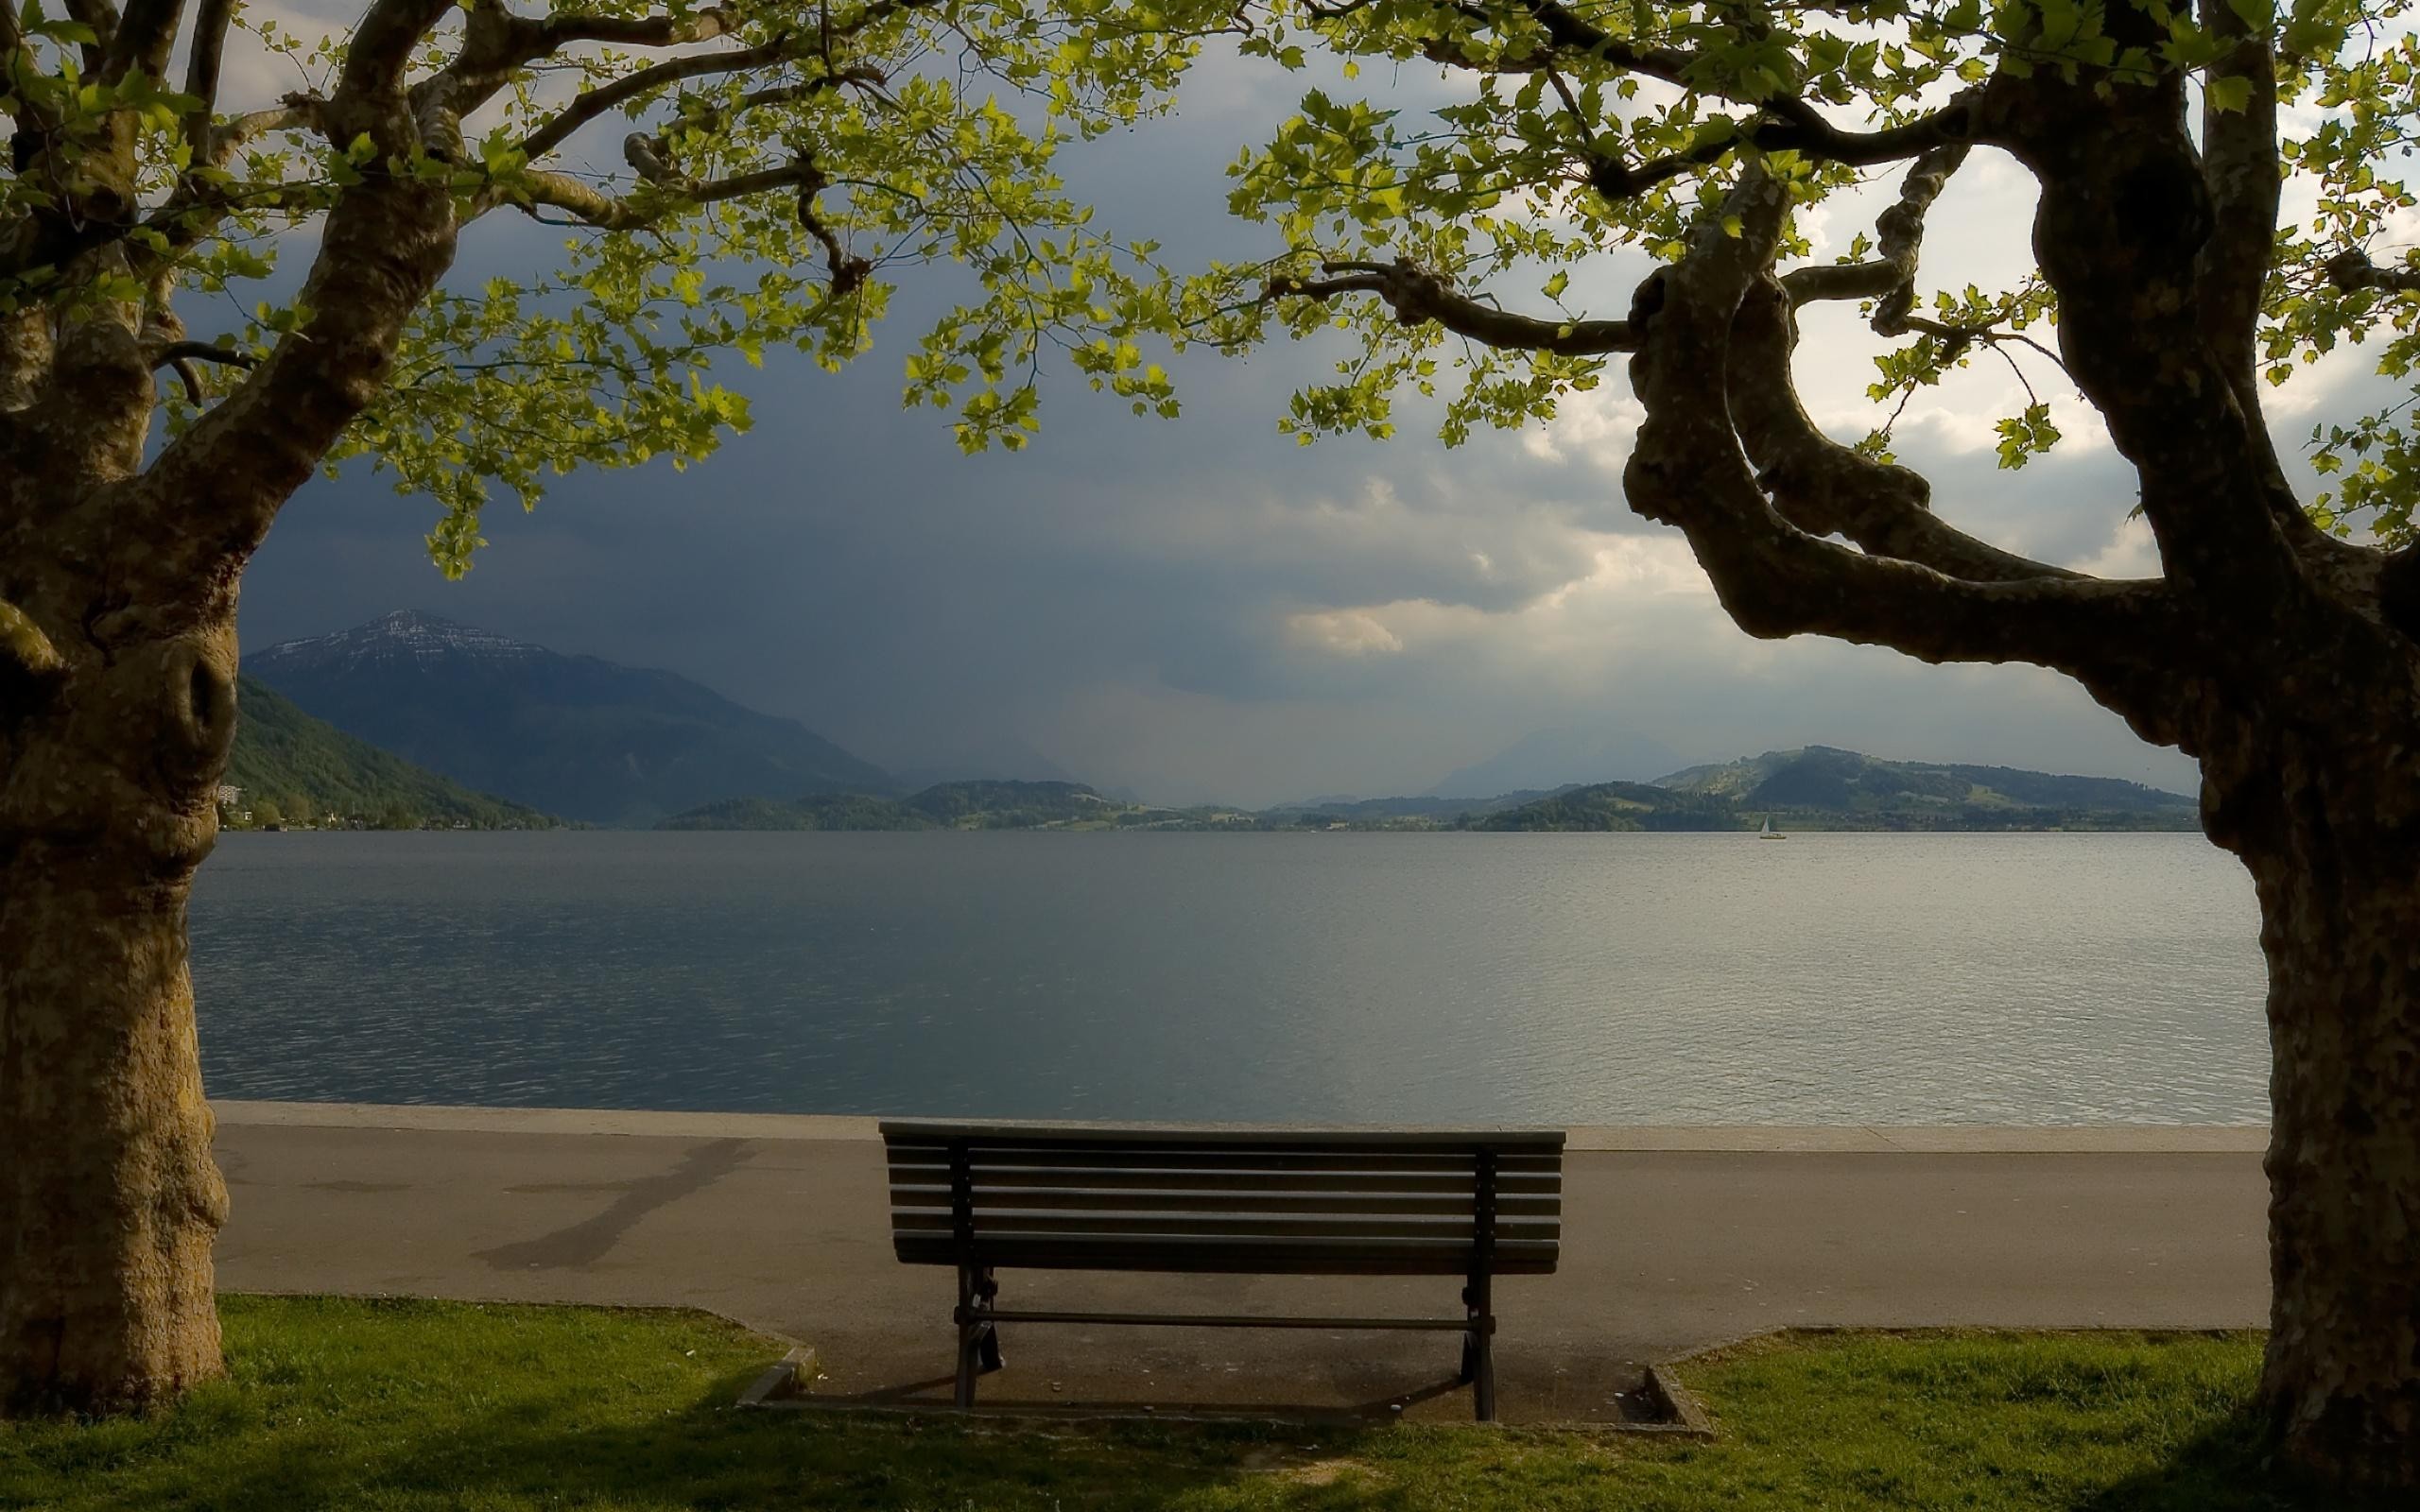 General 2560x1600 bench water trees outdoors landscape